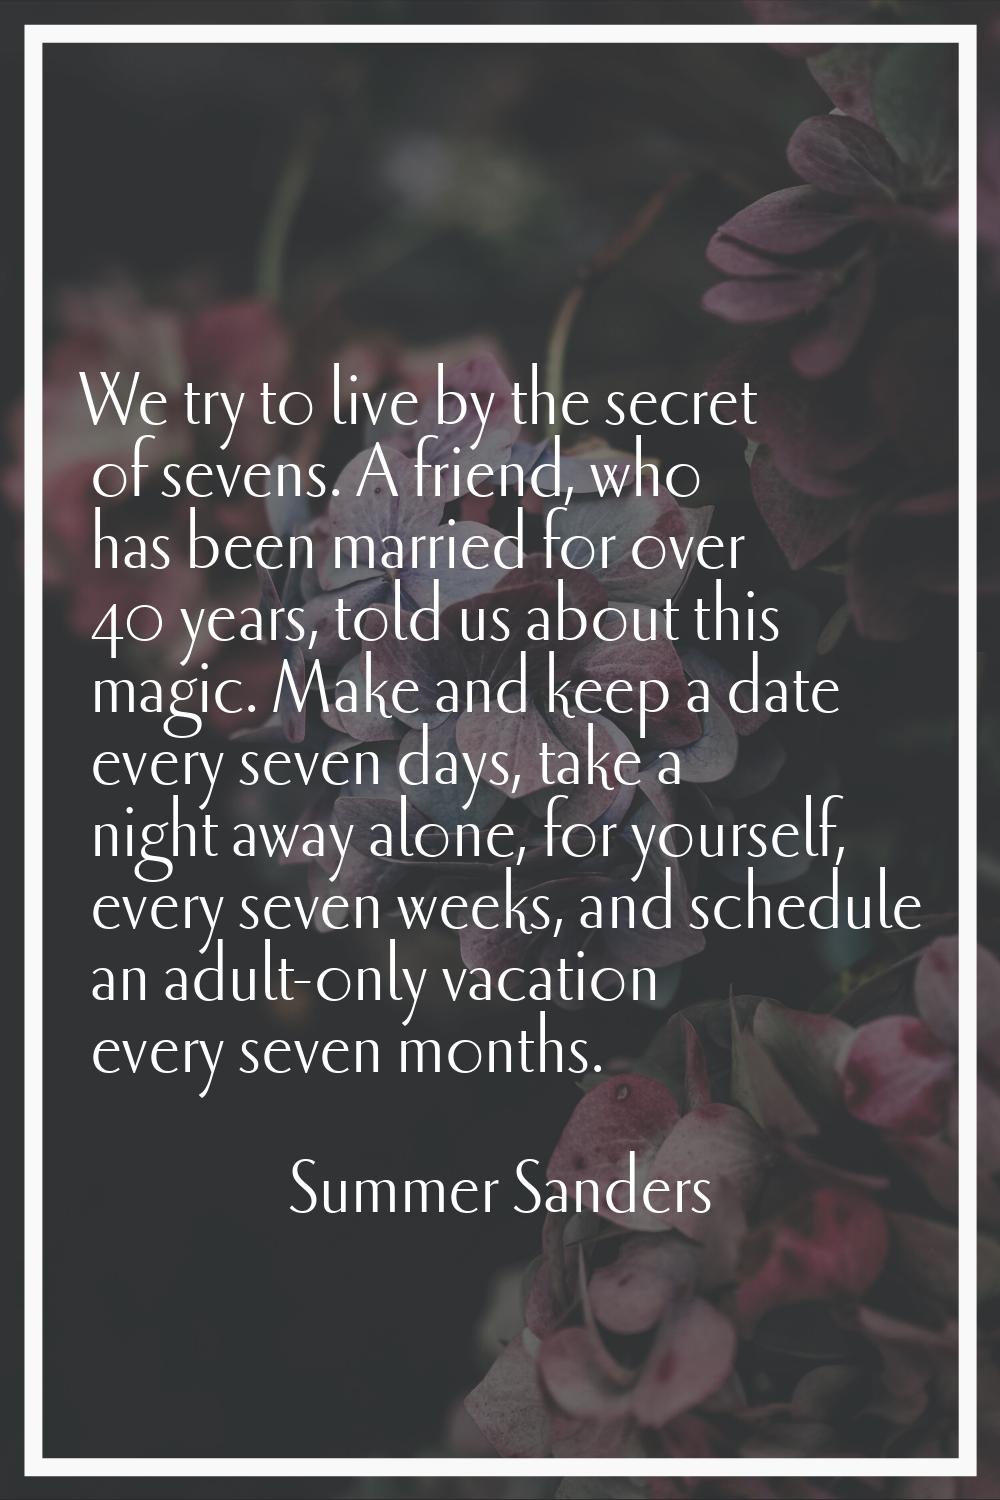 We try to live by the secret of sevens. A friend, who has been married for over 40 years, told us a